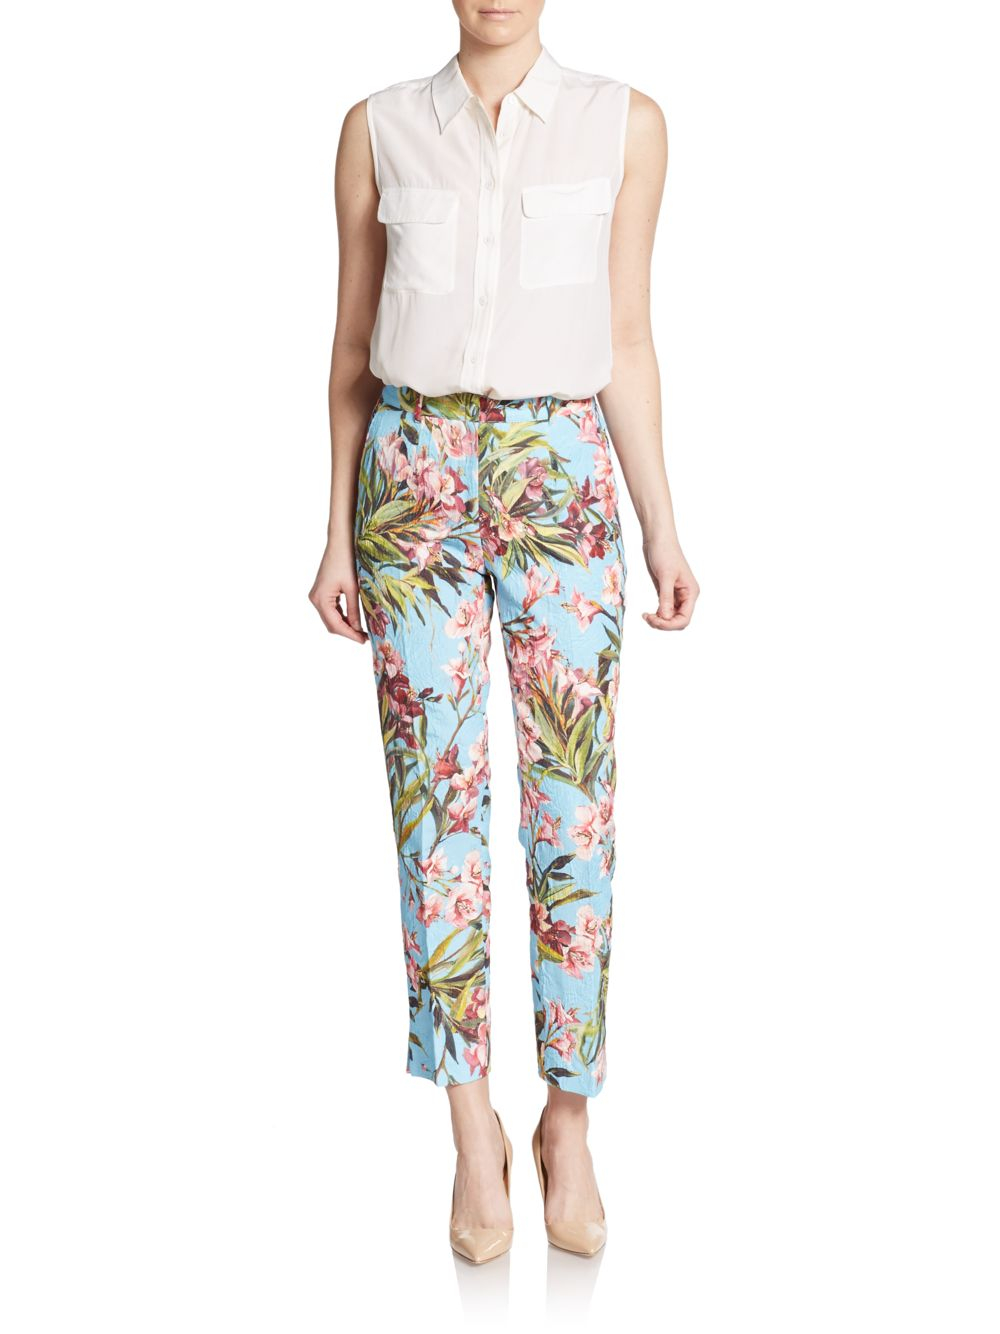 Dolce & Gabbana Cropped Floral-Print Pants in Blue - Lyst